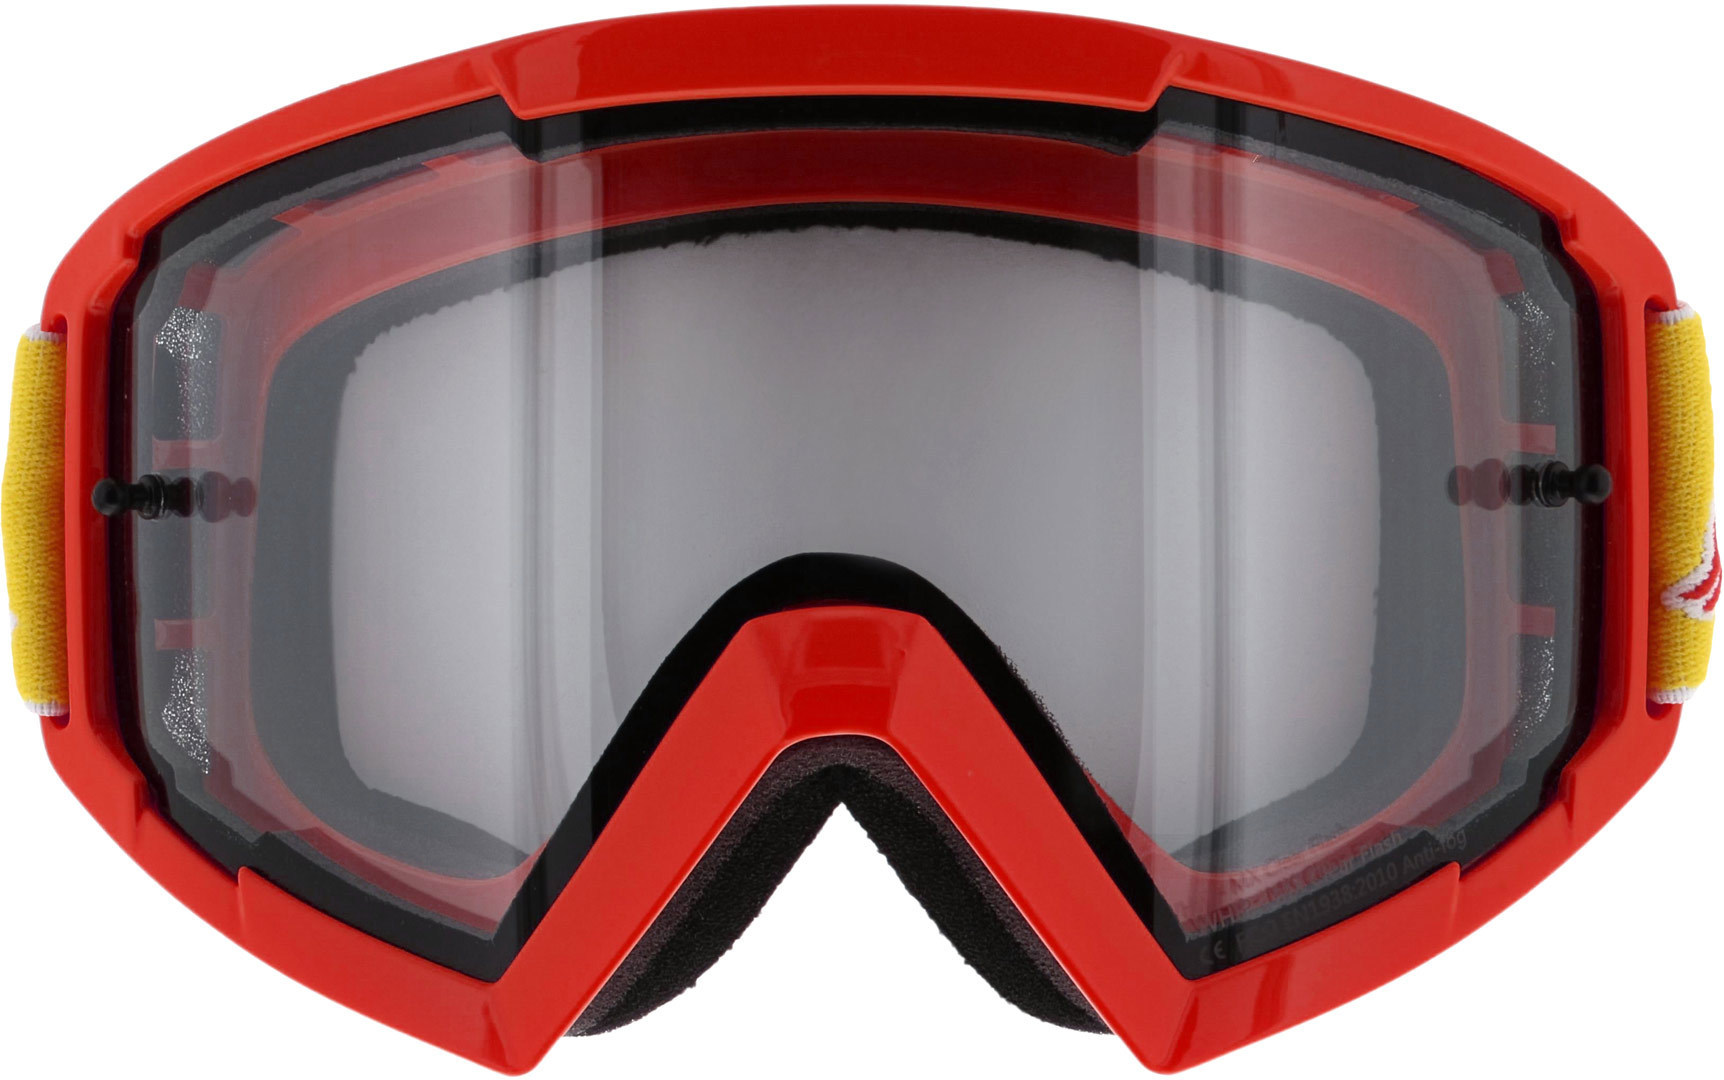 Red Bull SPECT Eyewear Whip SL 008 Motocross Goggles, clear, clear, Size One Size